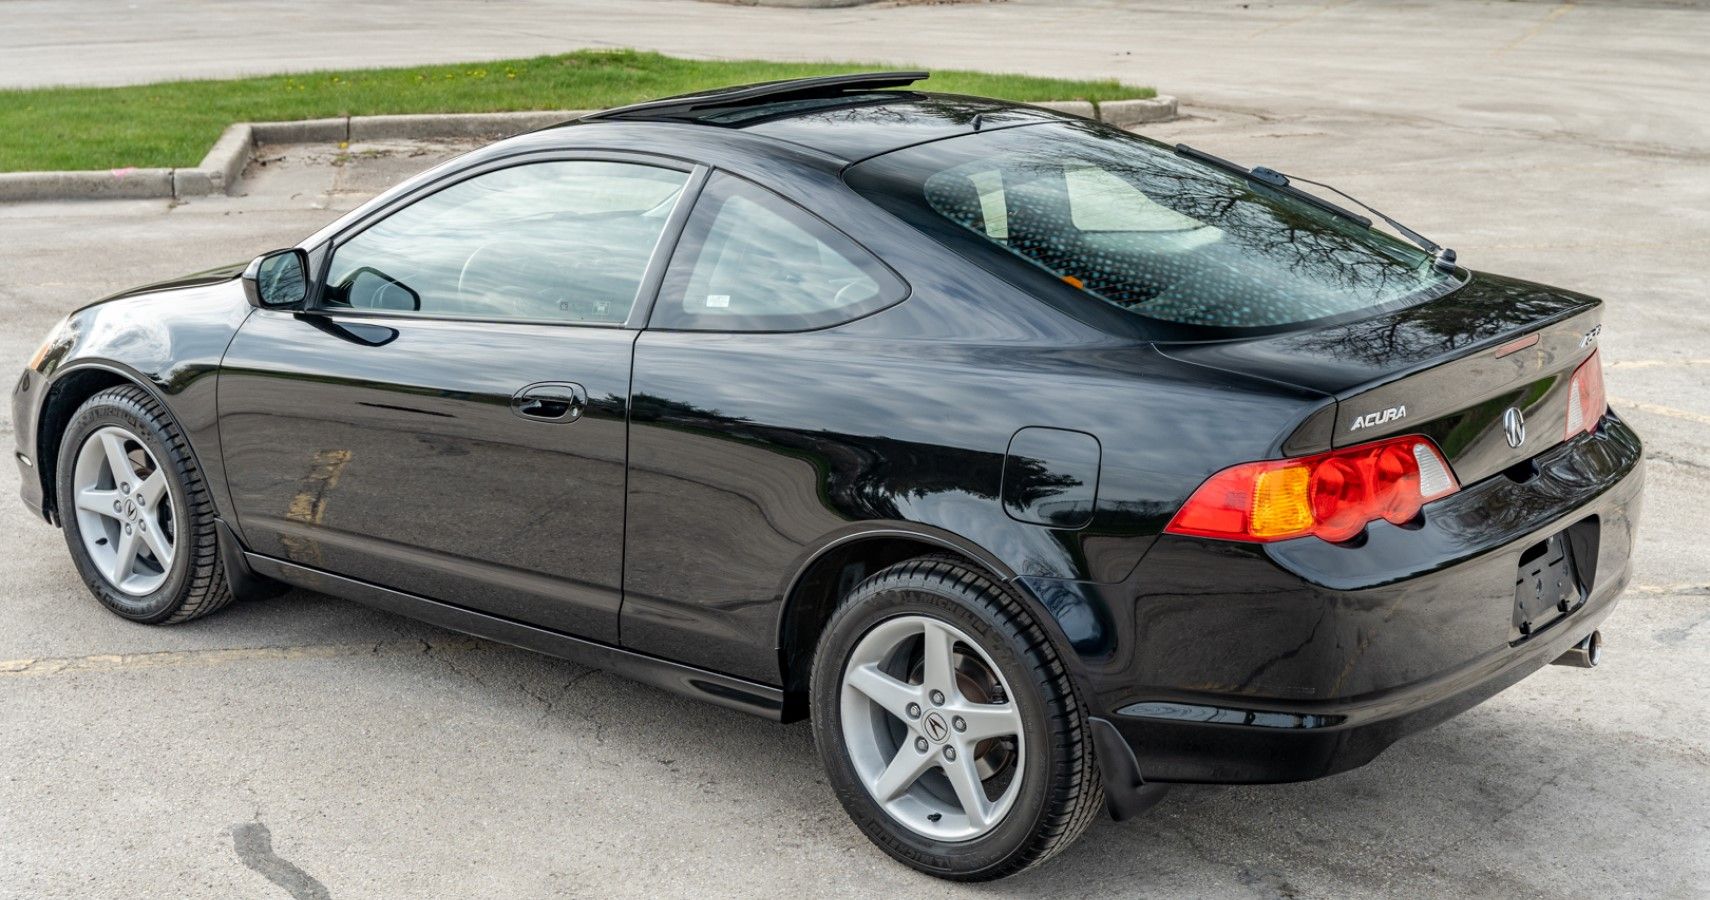 2003 Acura RSX Type-S rear third quarter view